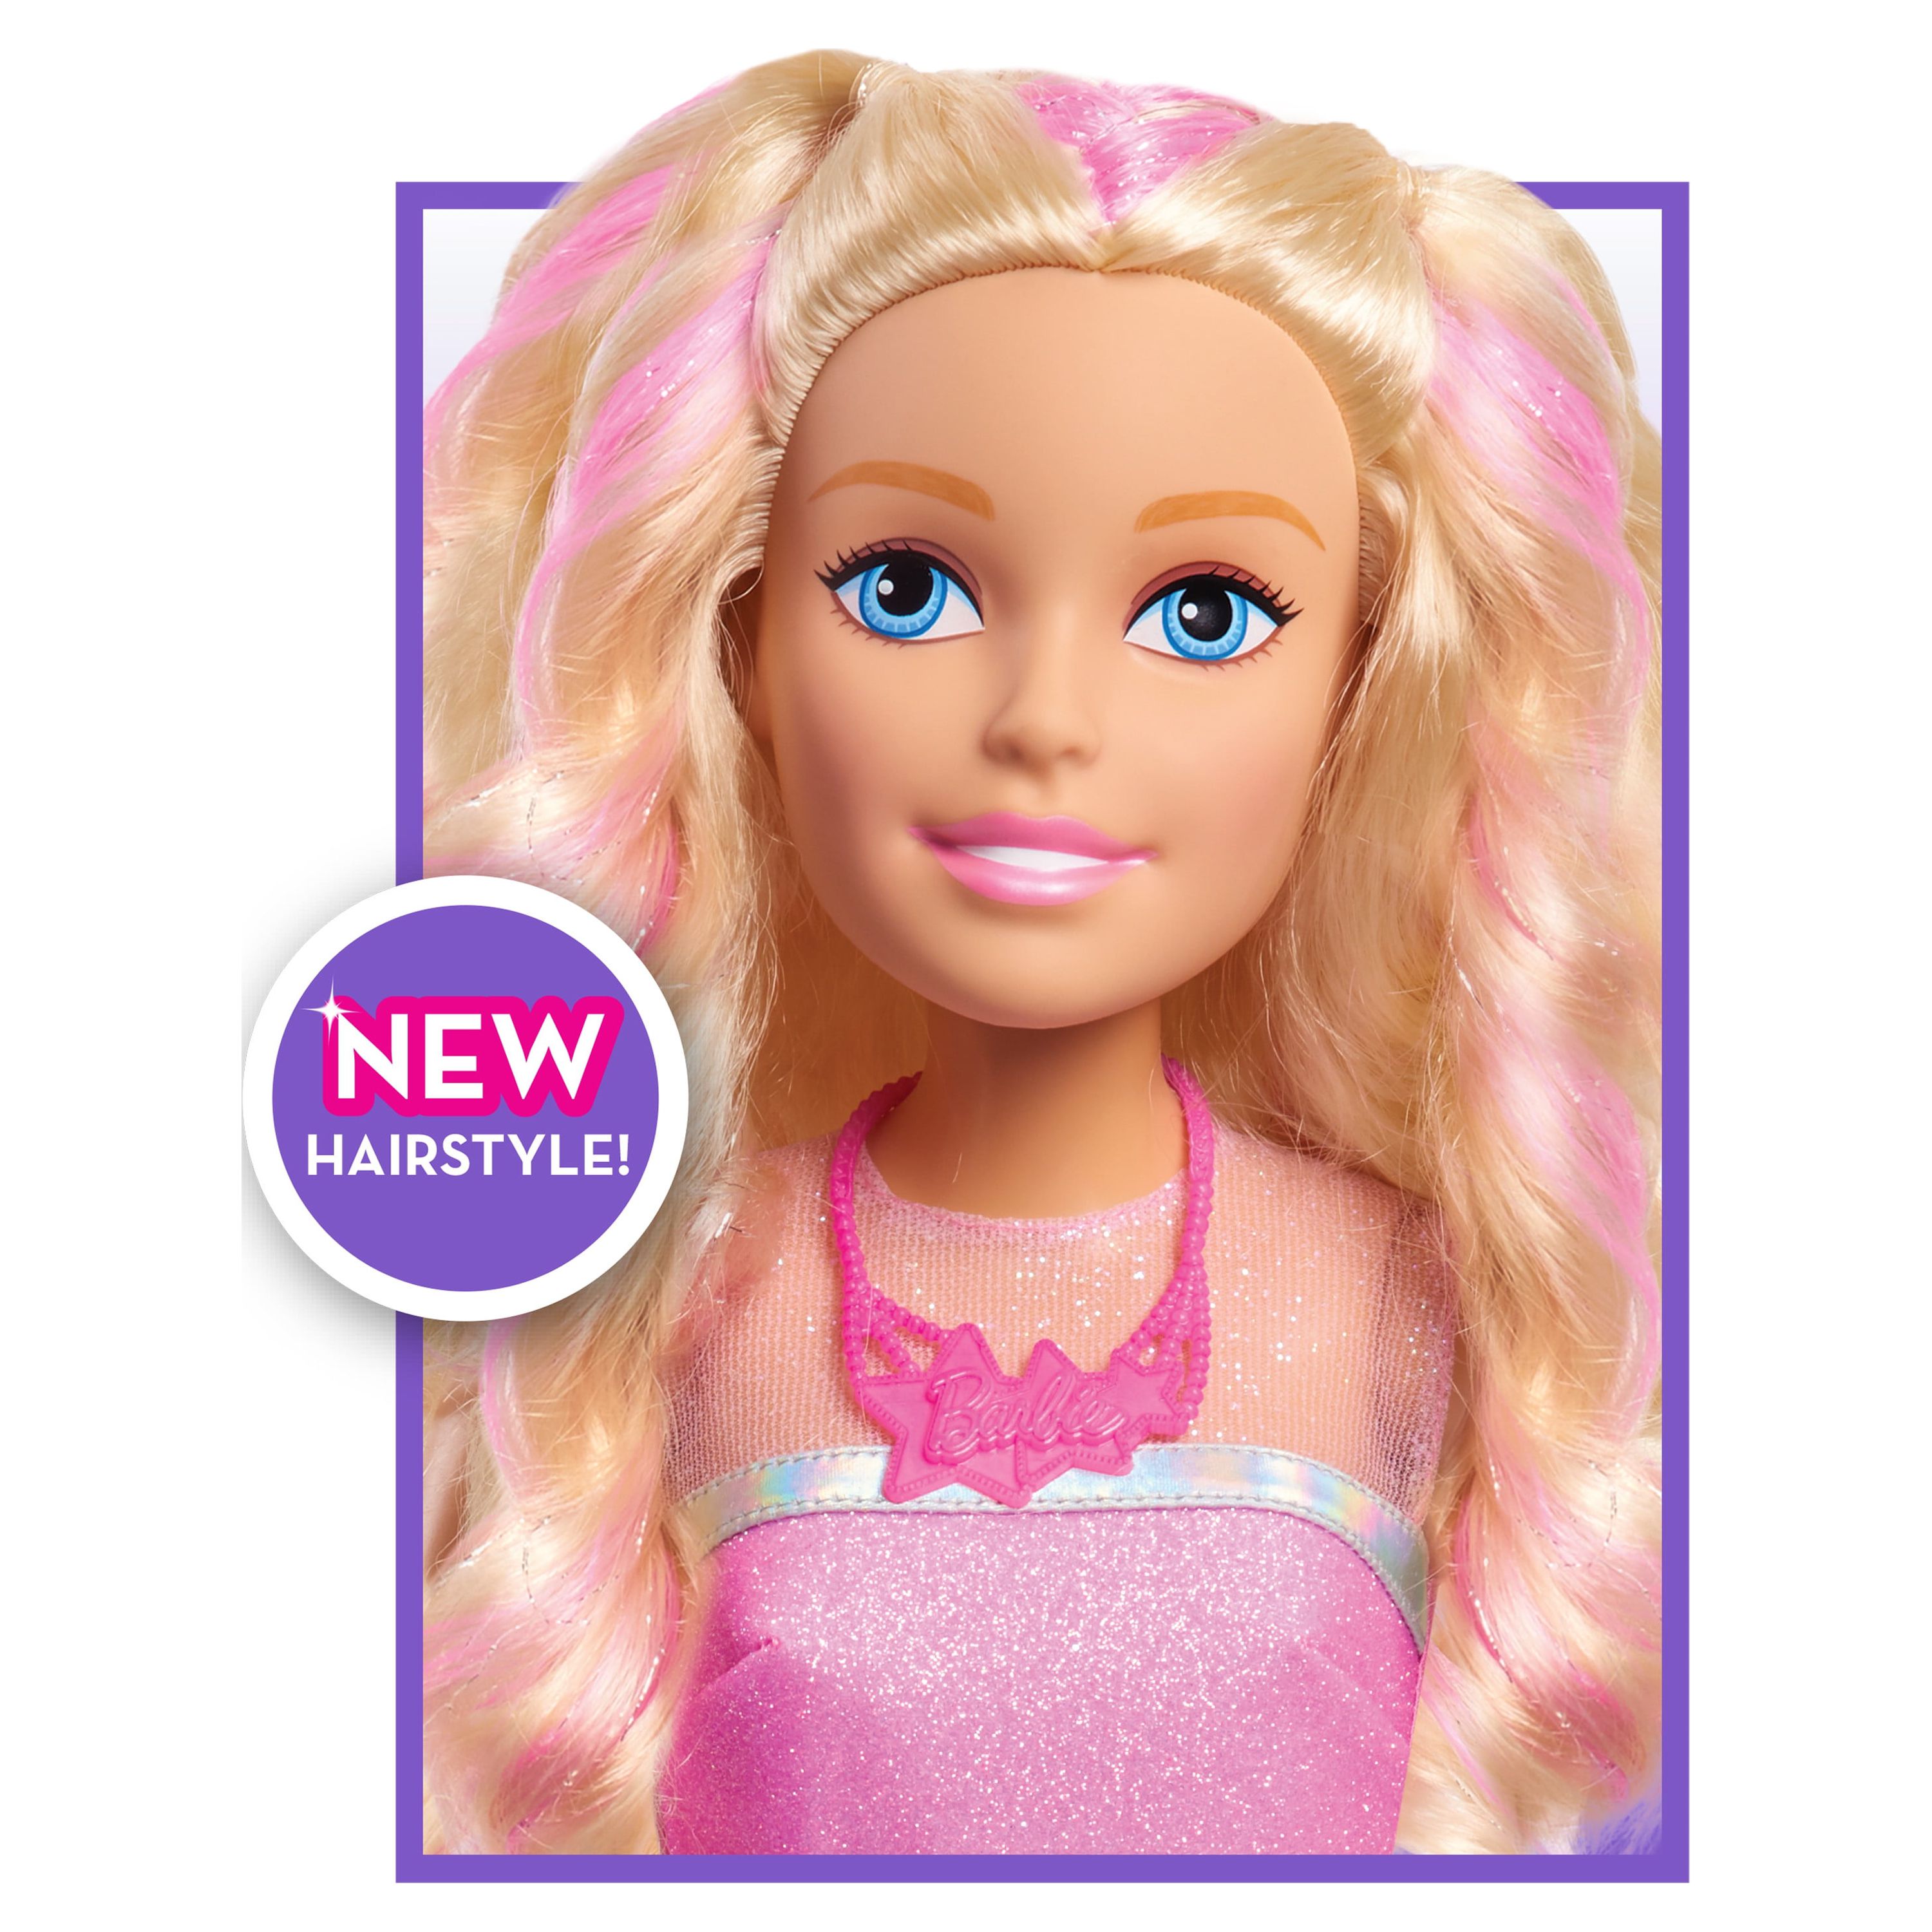 Barbie 28-Inch Tie Dye Style Best Fashion Friend, Blonde Hair,  Kids Toys for Ages 3 Up, Gifts and Presents - image 5 of 10